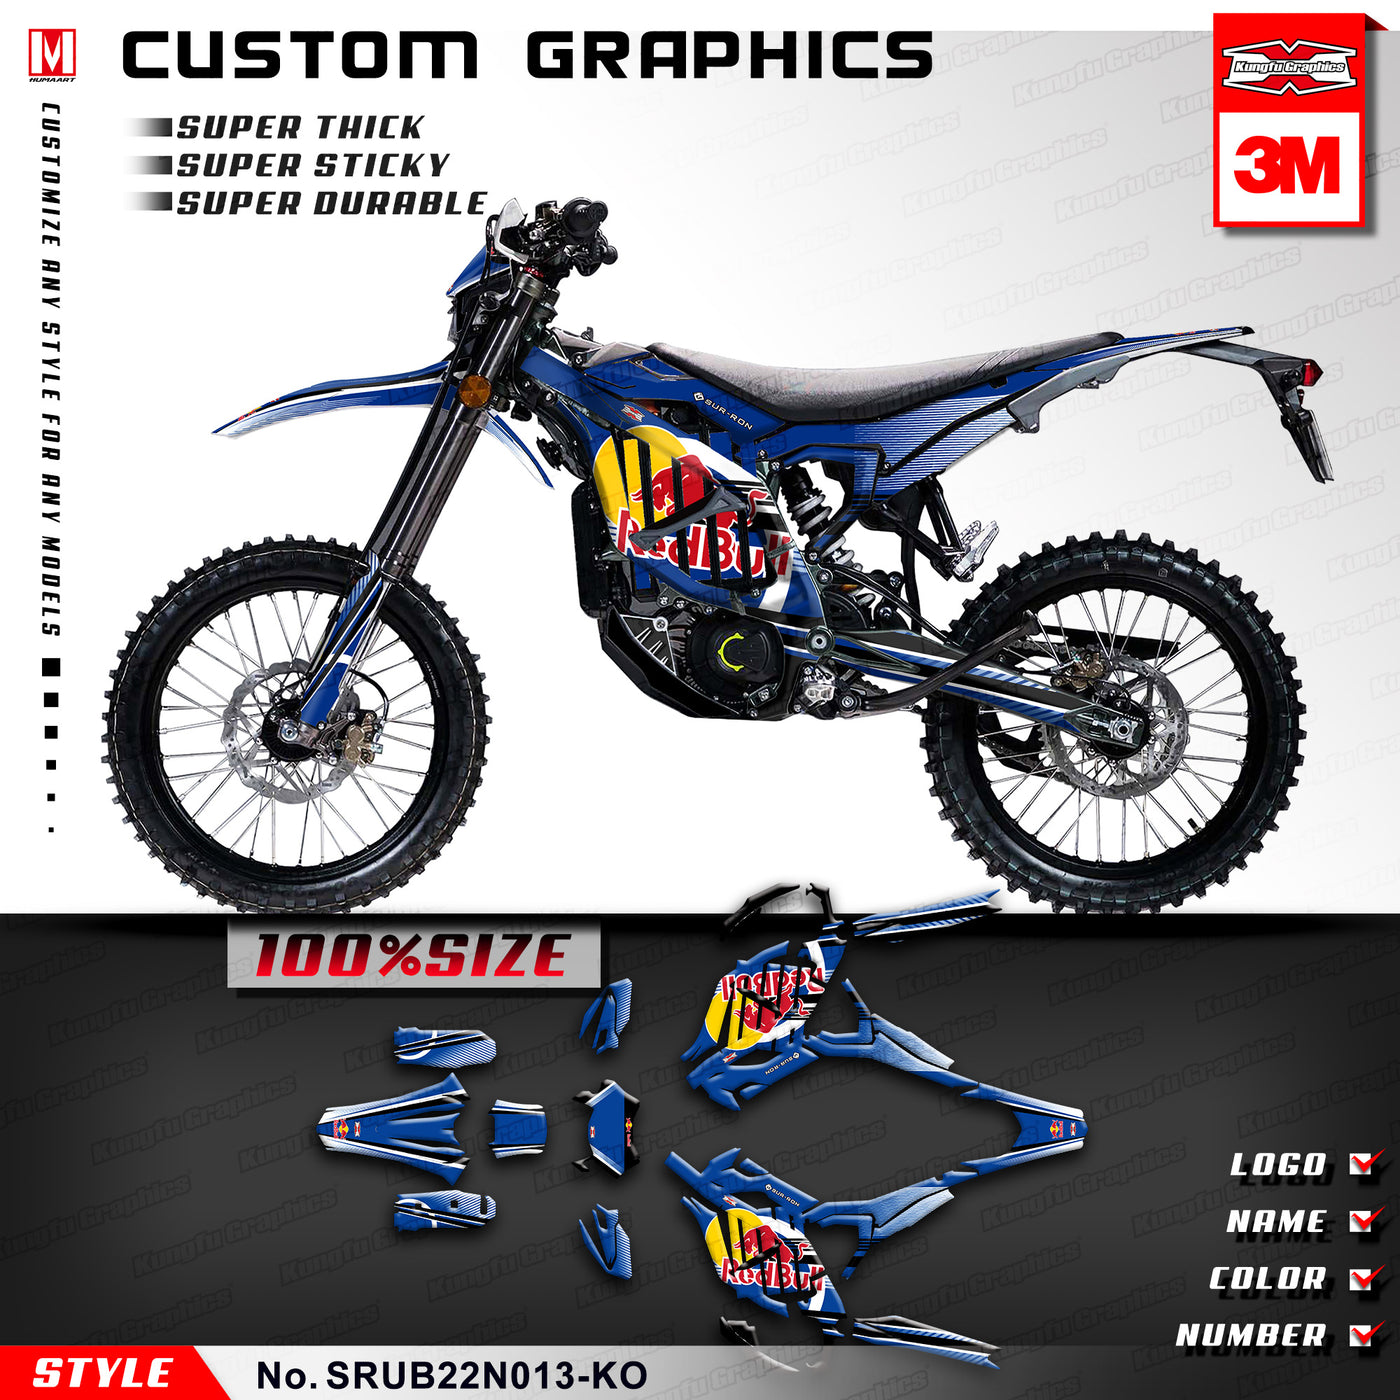 Surron Dirt Bike Graphics Custom Decal Kit for the Sur-Ron Ultra Bee